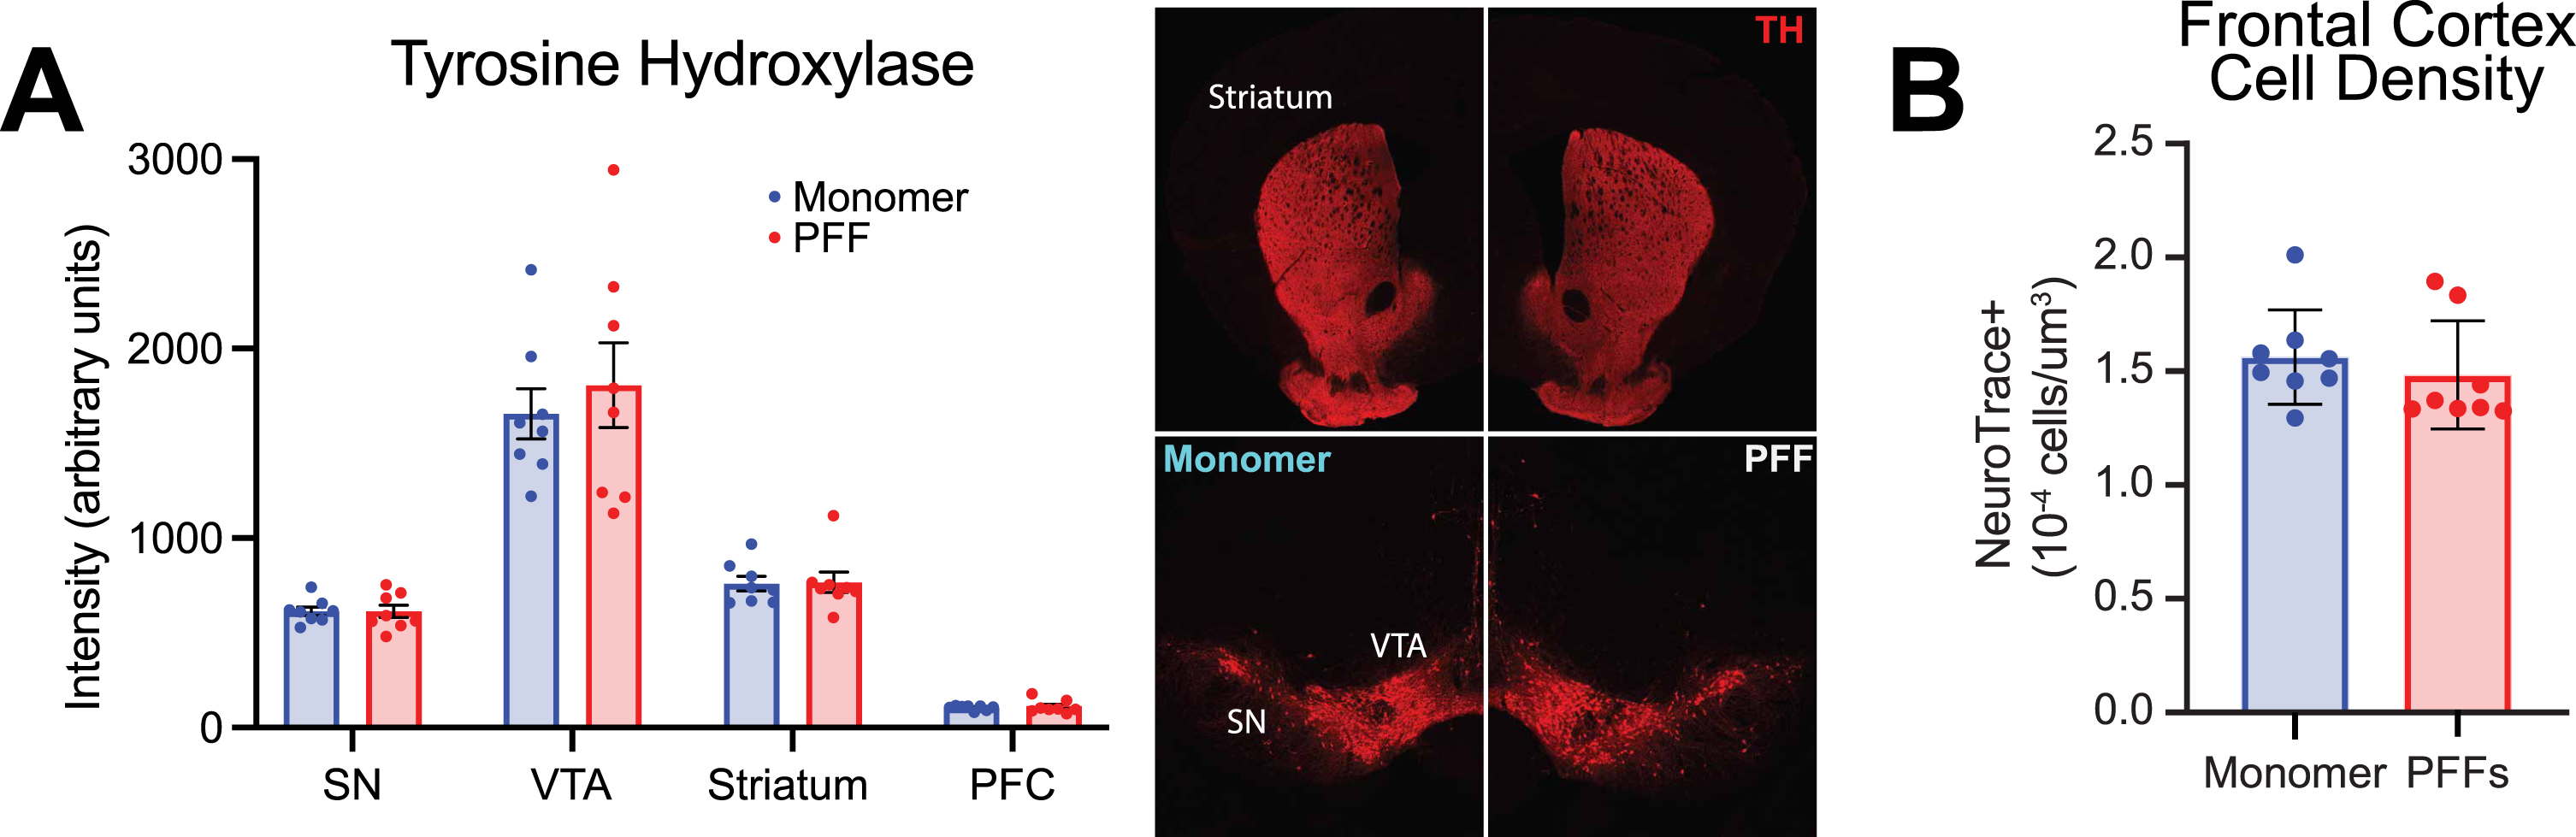 Evaluation of tyrosine hydroxylase (TH) and prefrontal cortex densitometry in monomer control and pre-formed fibril (PFF) injected mice. A) Left panel: TH intensity (arbitrary units) from 4 different brain regions in monomer and PFF treated mice: substantia nigra (SN), ventral tegmental area (VTA), striatum, and prefrontal cortex (PFC). Right panel: representative images of TH in the SN, VTA, and striatum from a monomer treated mouse (left) and PFF treated mouse (right). B) PFC neuron densitometry. PFF treated mice did not differ from monomer controls (p = 0.5). All data from 8 monomer (blue) and 8 PFF (red) mice. All data are expressed as mean±SEM, and each dot represents a single mouse.